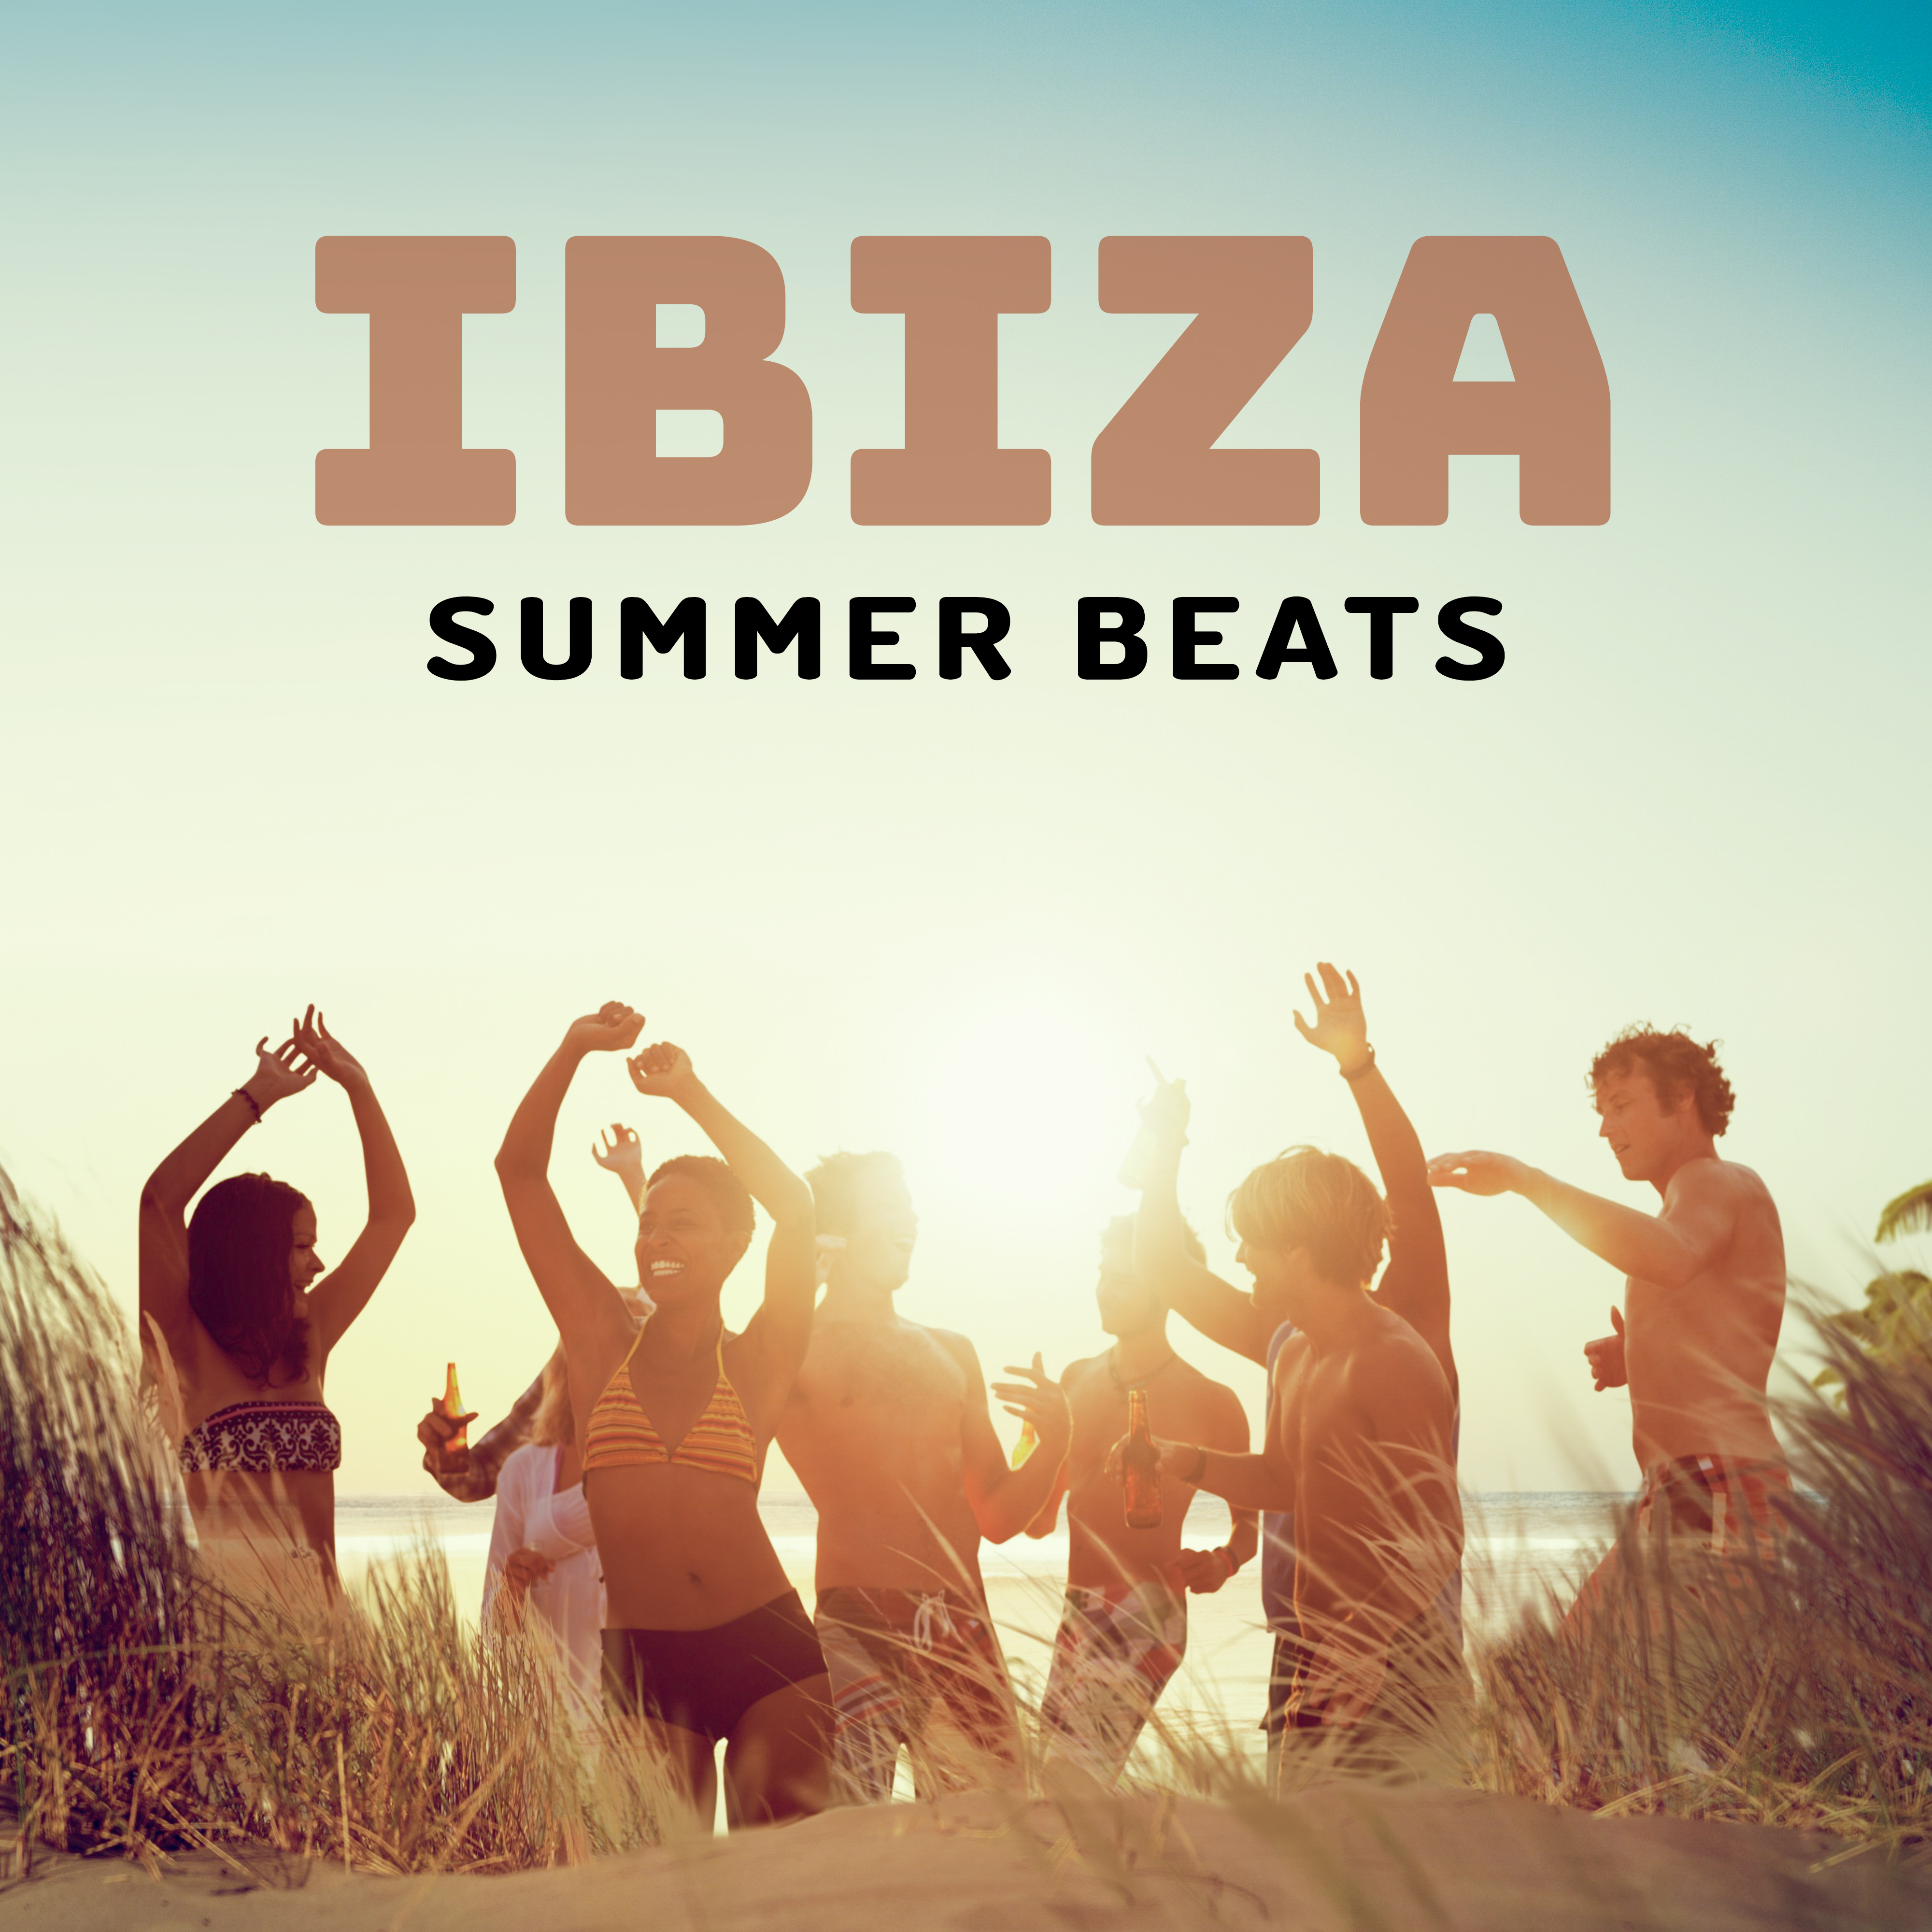 Ibiza Summer Beats – Chill Out 2017, Summer Lounge, Relax, Club, Party Hits 2017